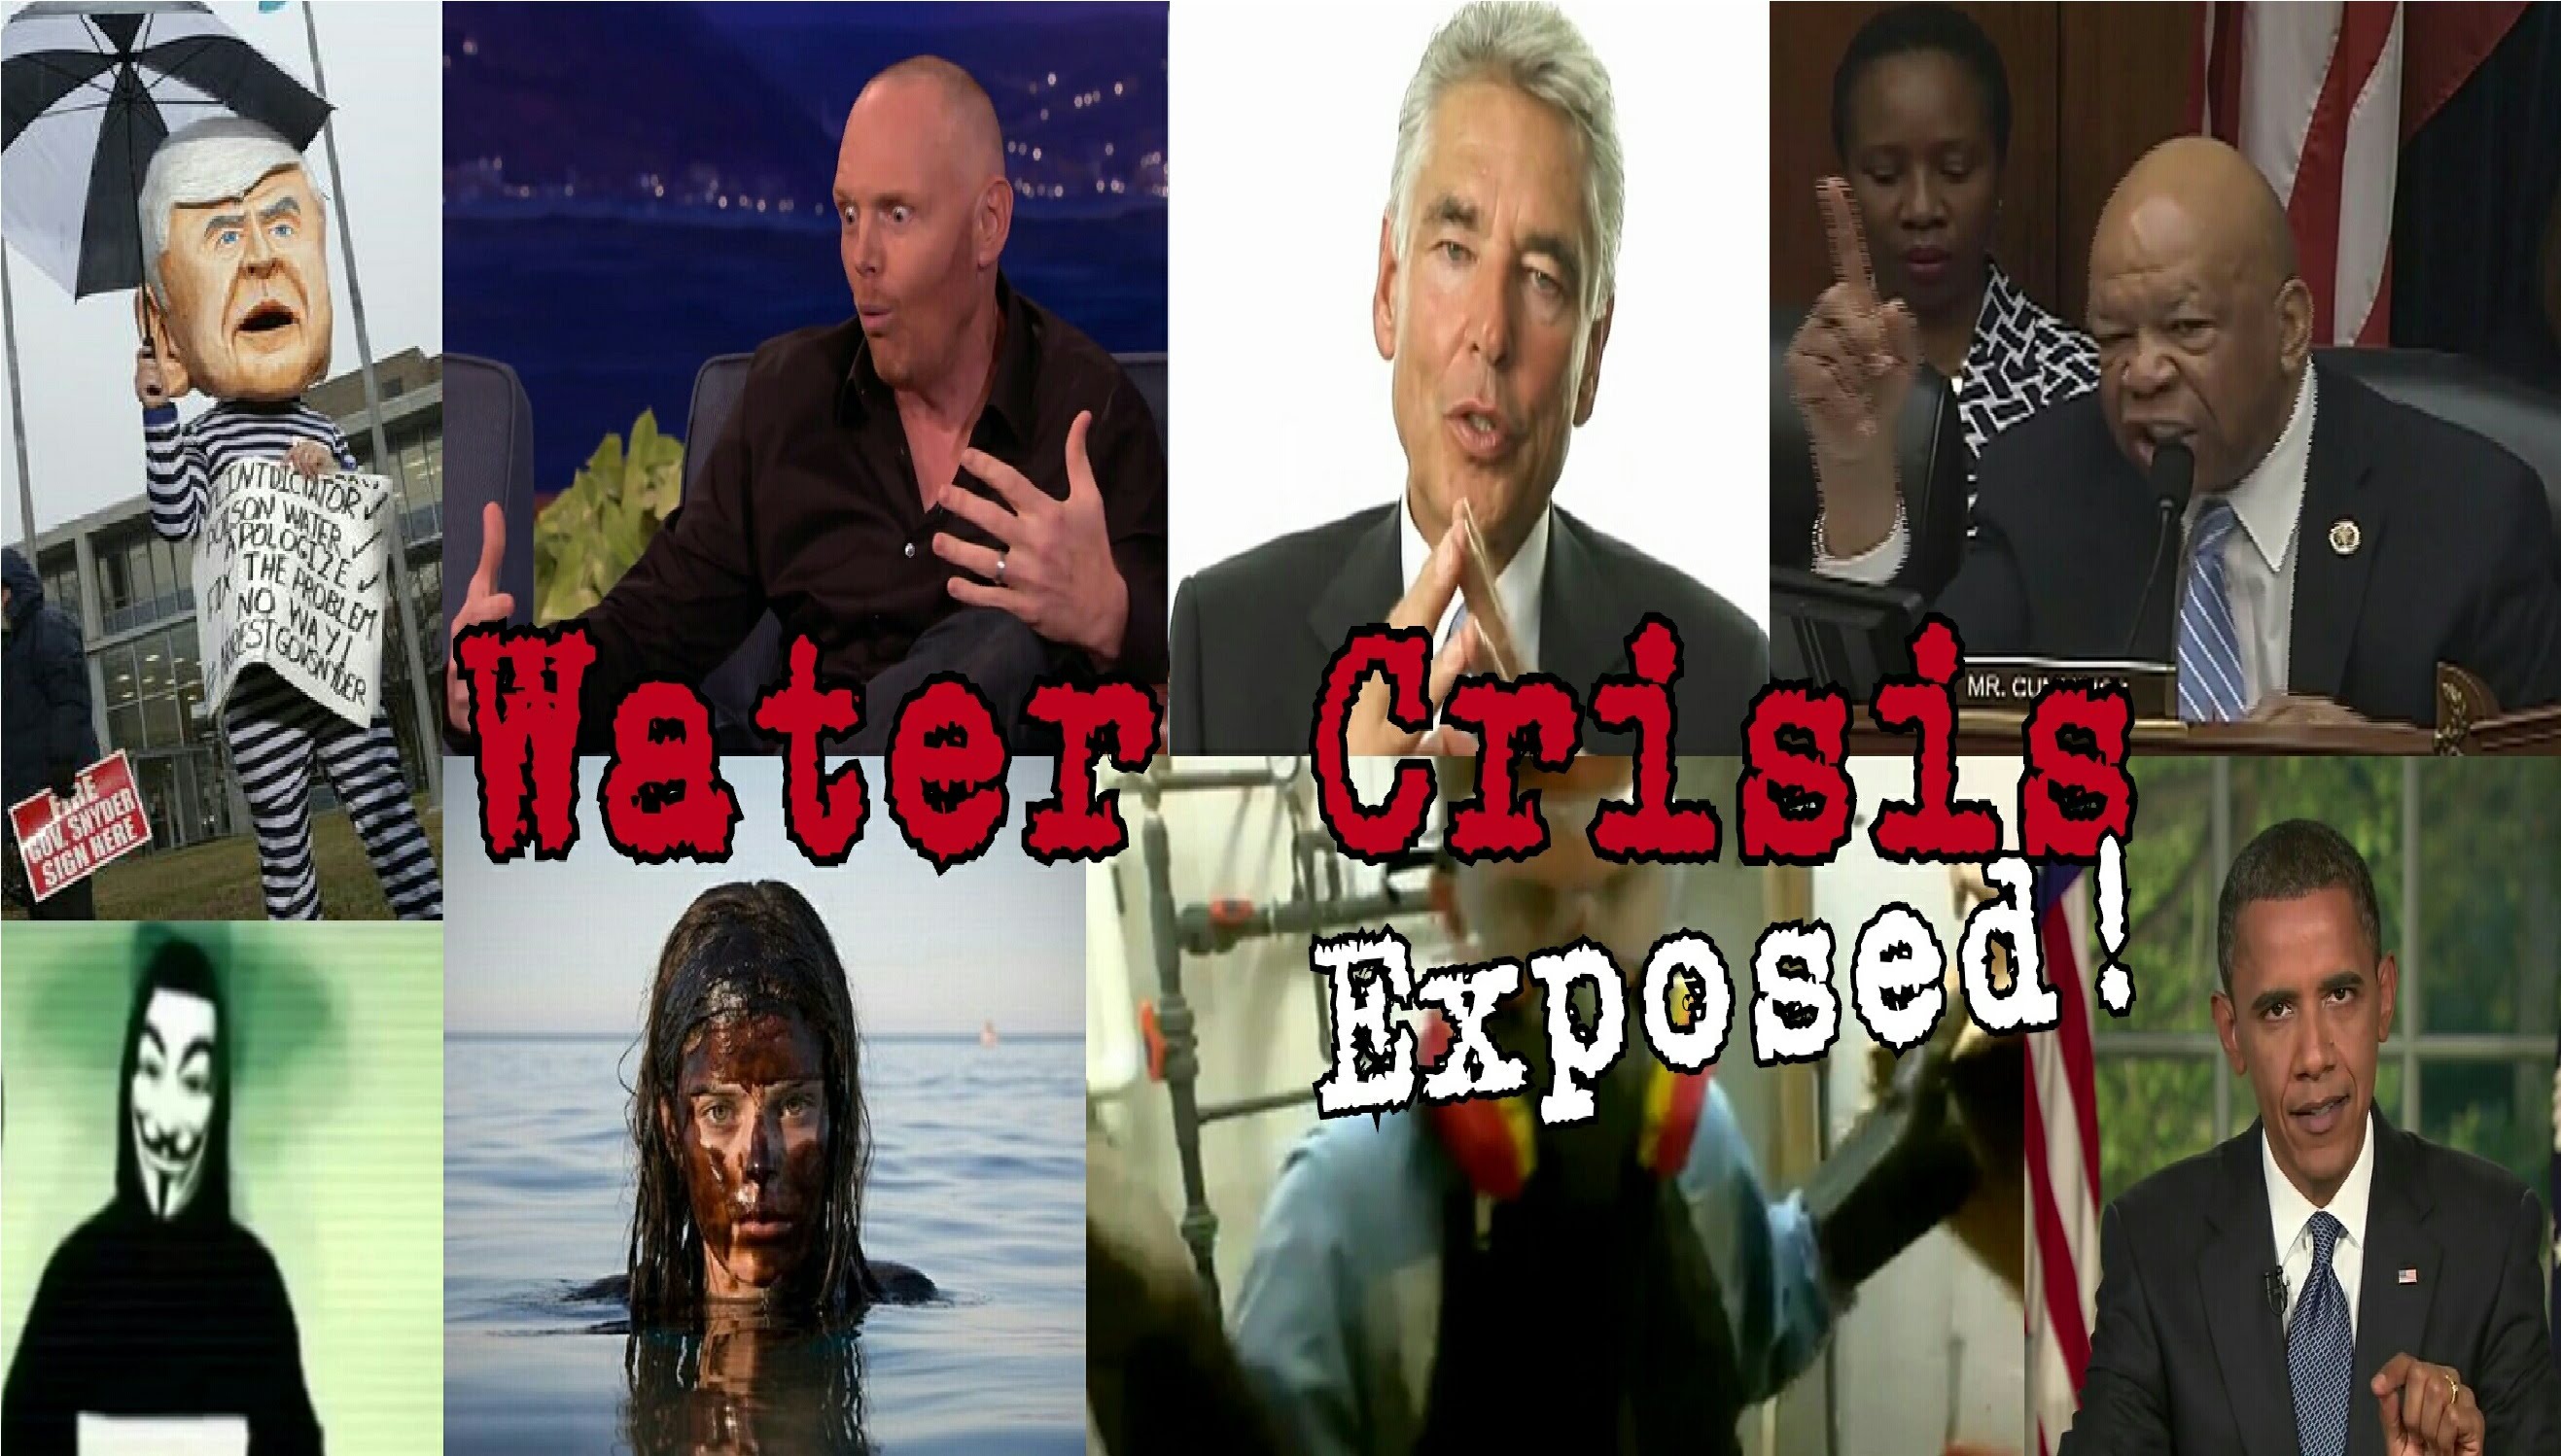 WATER CRISIS EXPOSED Documentary